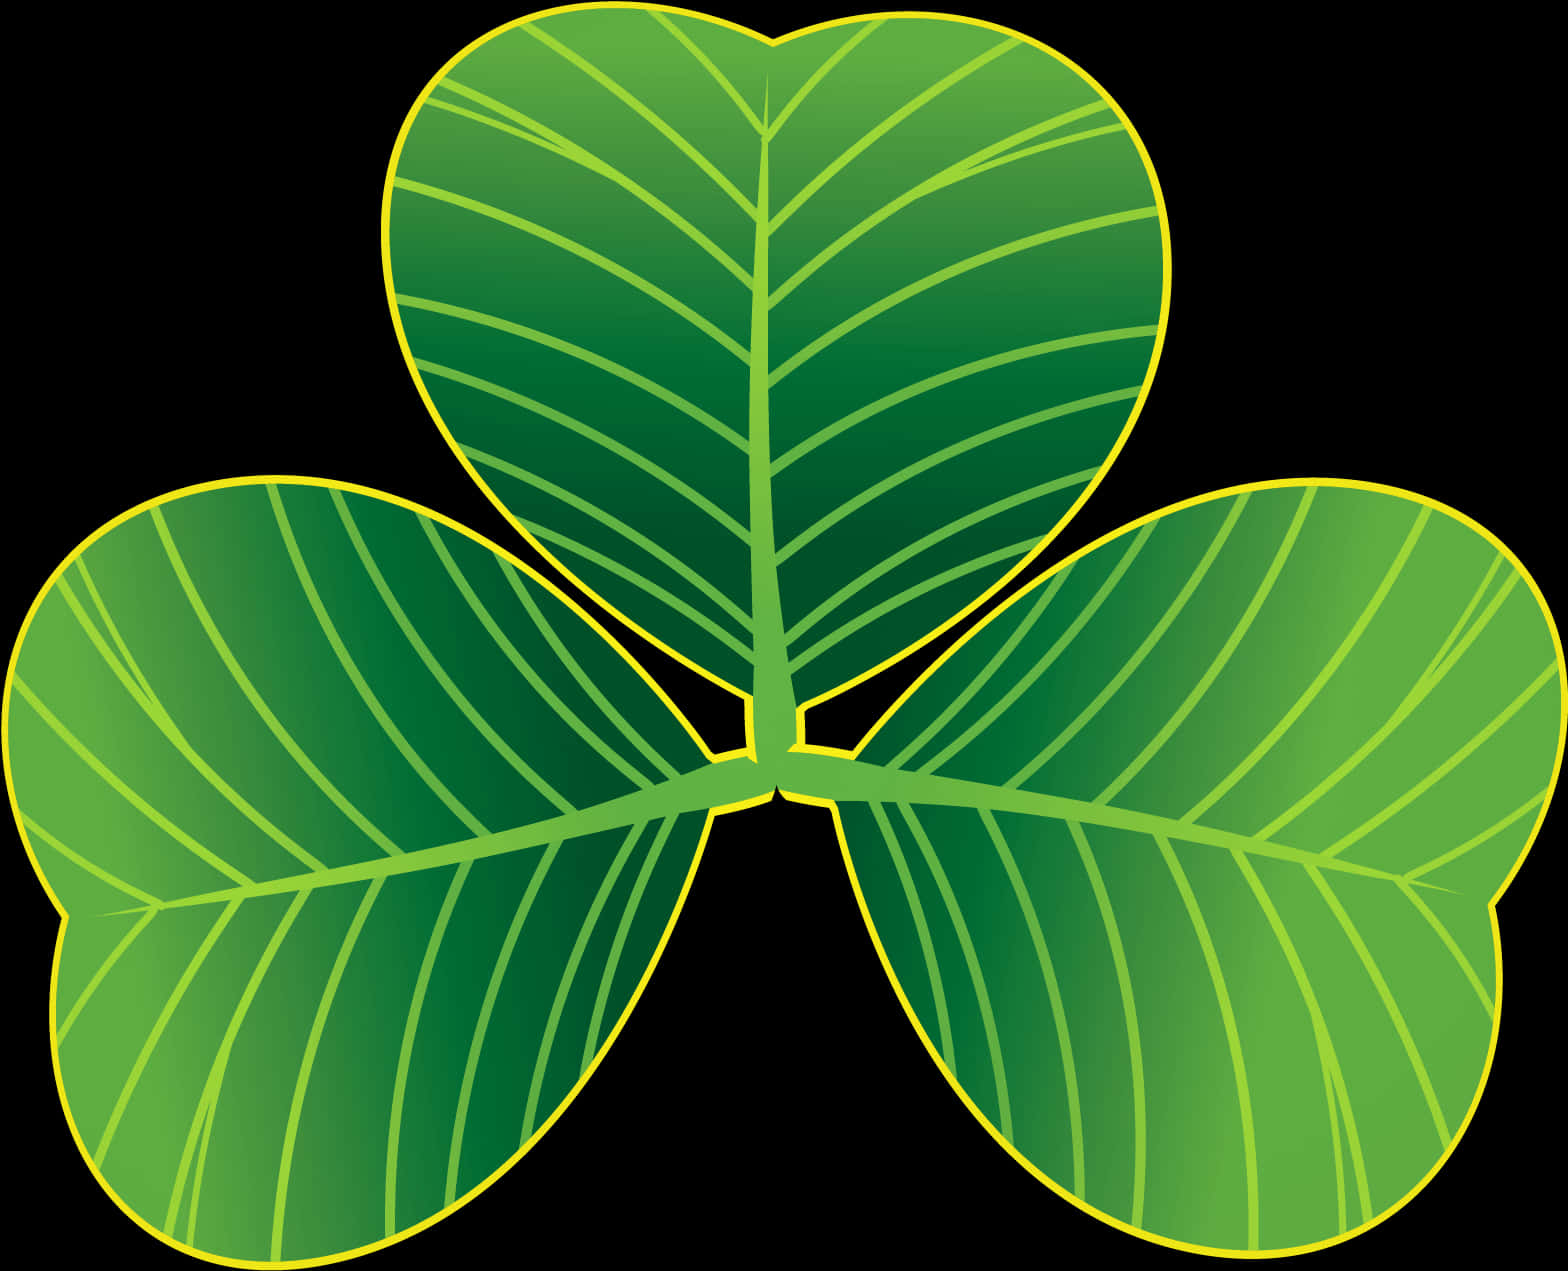 A Green Leafy Clover With Yellow Lines